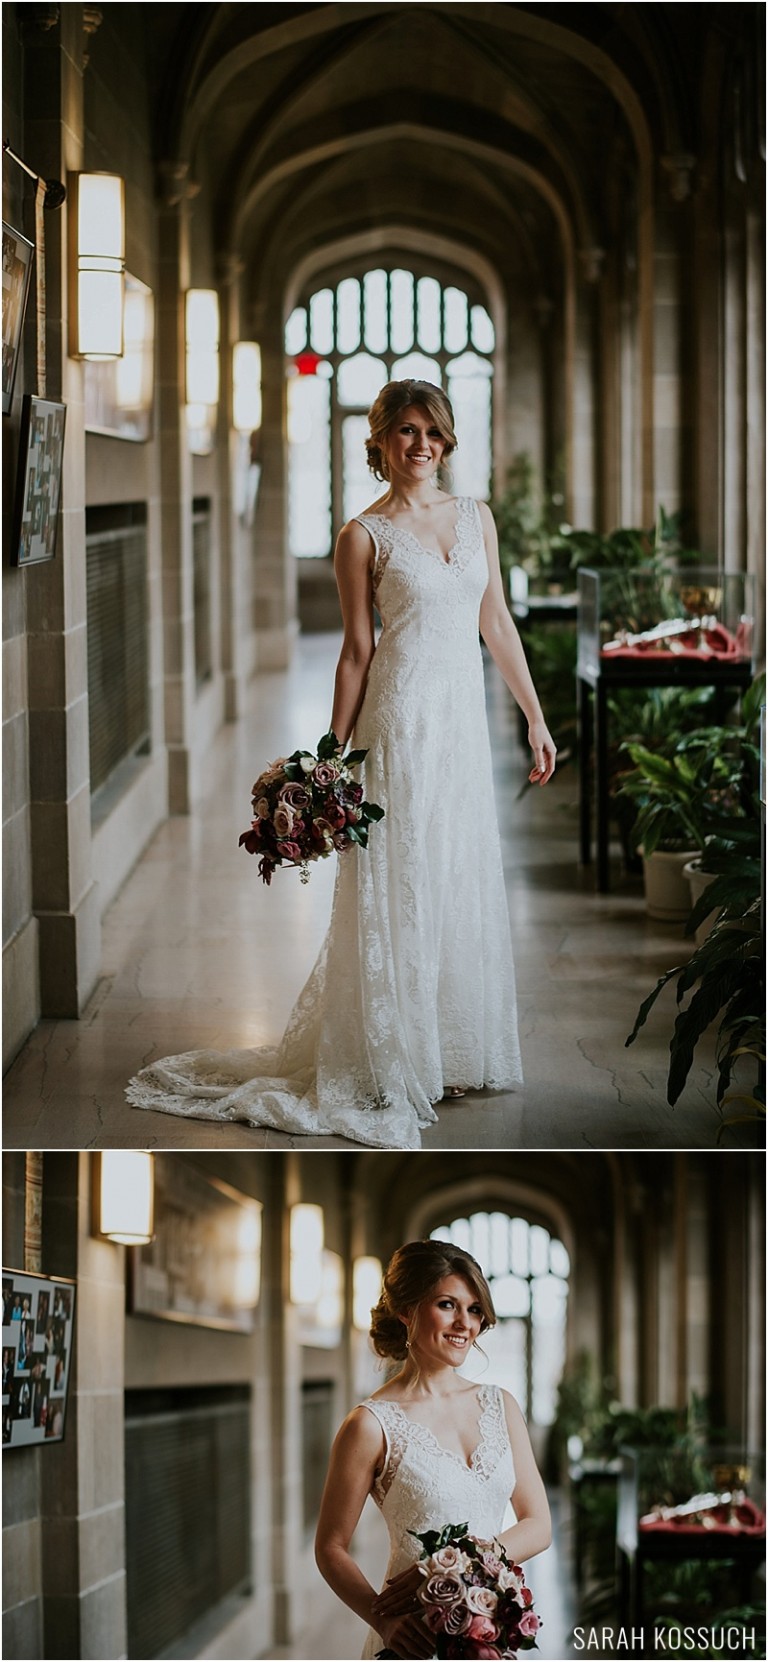 Lovett Hall at The Henry Ford Museum Michigan Wedding Photography 1075 | Sarah Kossuch